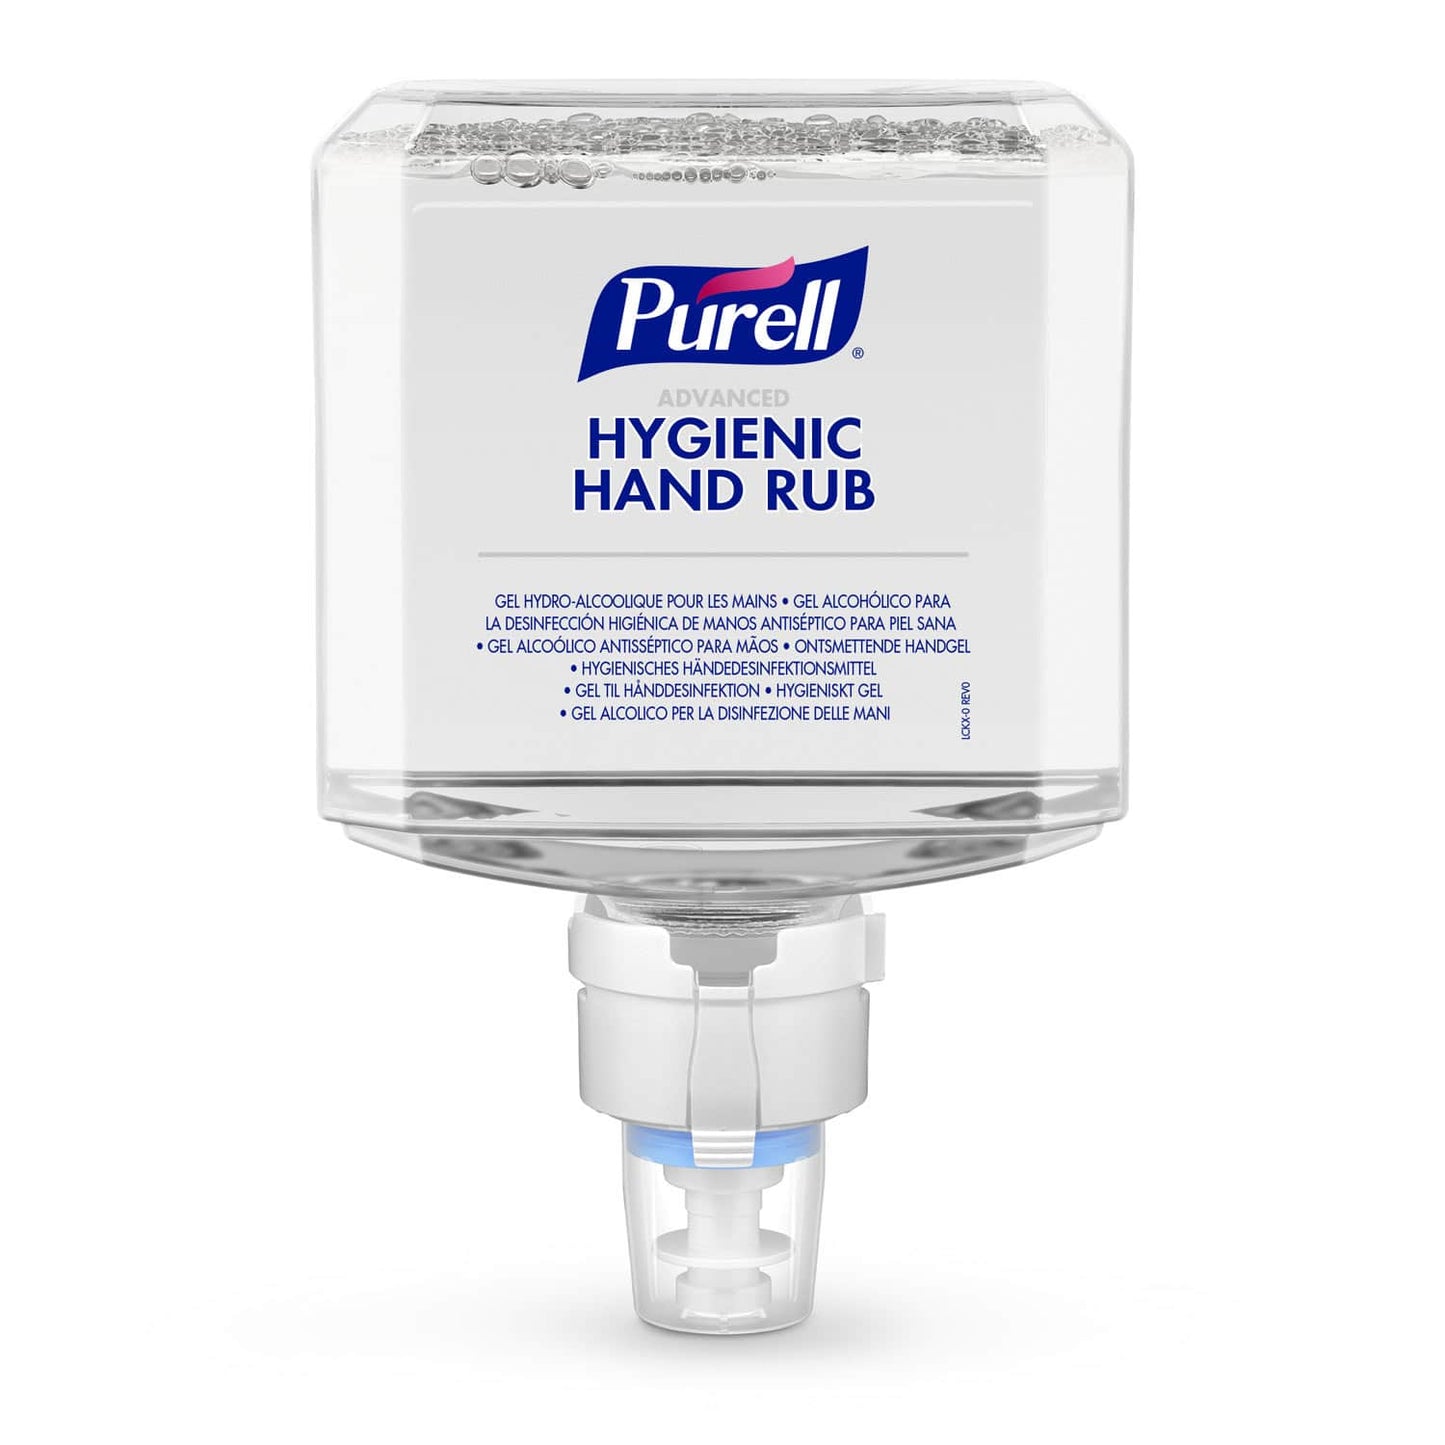 Purell® Advanced Hygienic Hand Rub Refill Pack For Use With The Respective Purell Dispenser